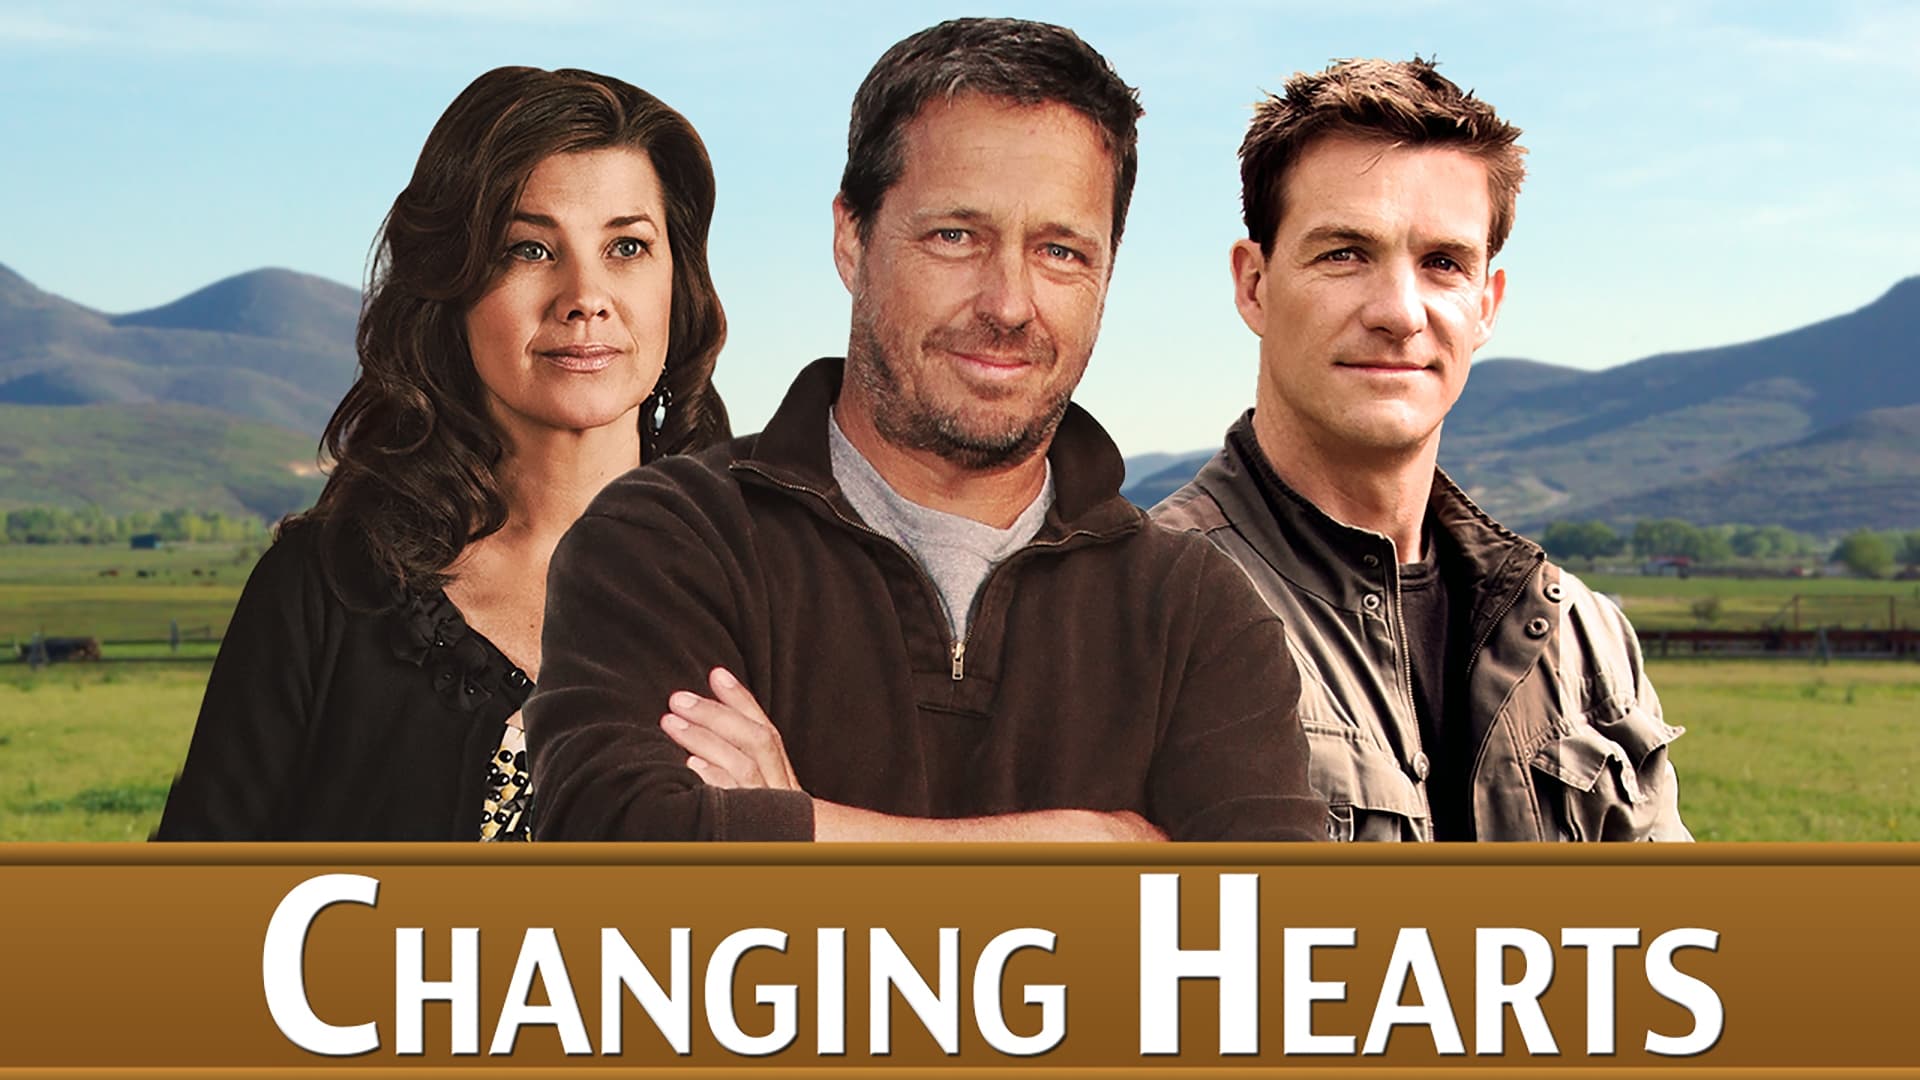 Changing Hearts (2012)